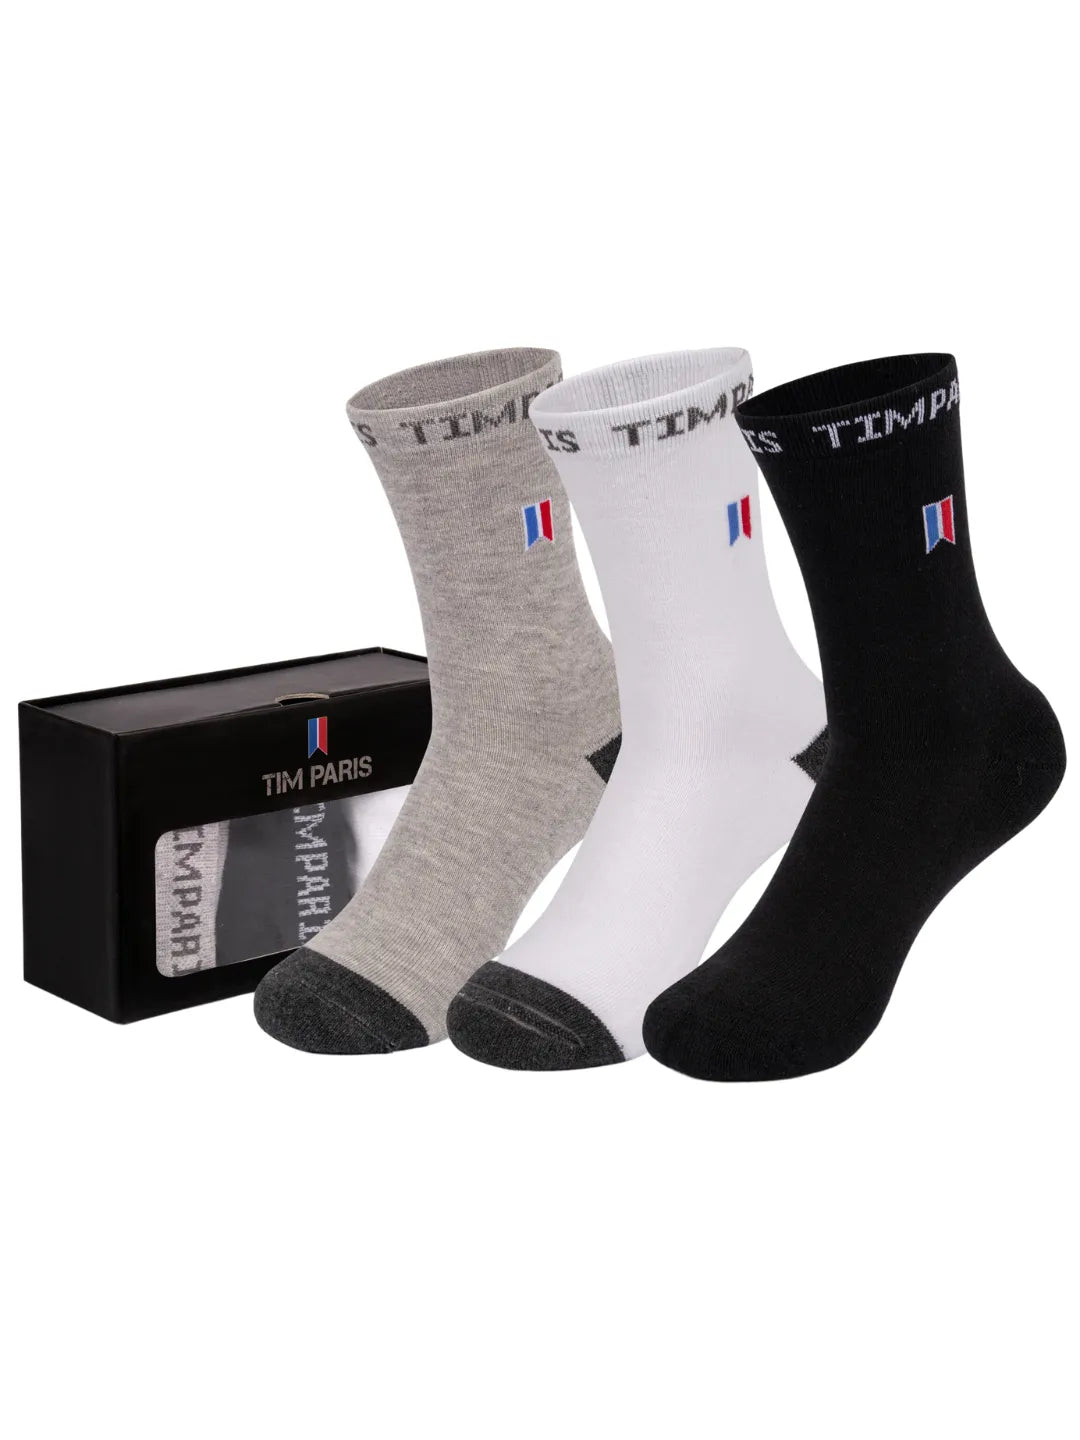 Socks For Premium High Ankle Length Sports Socks With Thick Cotton Cushion Multi-Purpose, Extra Durable Socks In An Assorted Combo| Pack Of 3 Free Size|(Black/Grey/White)